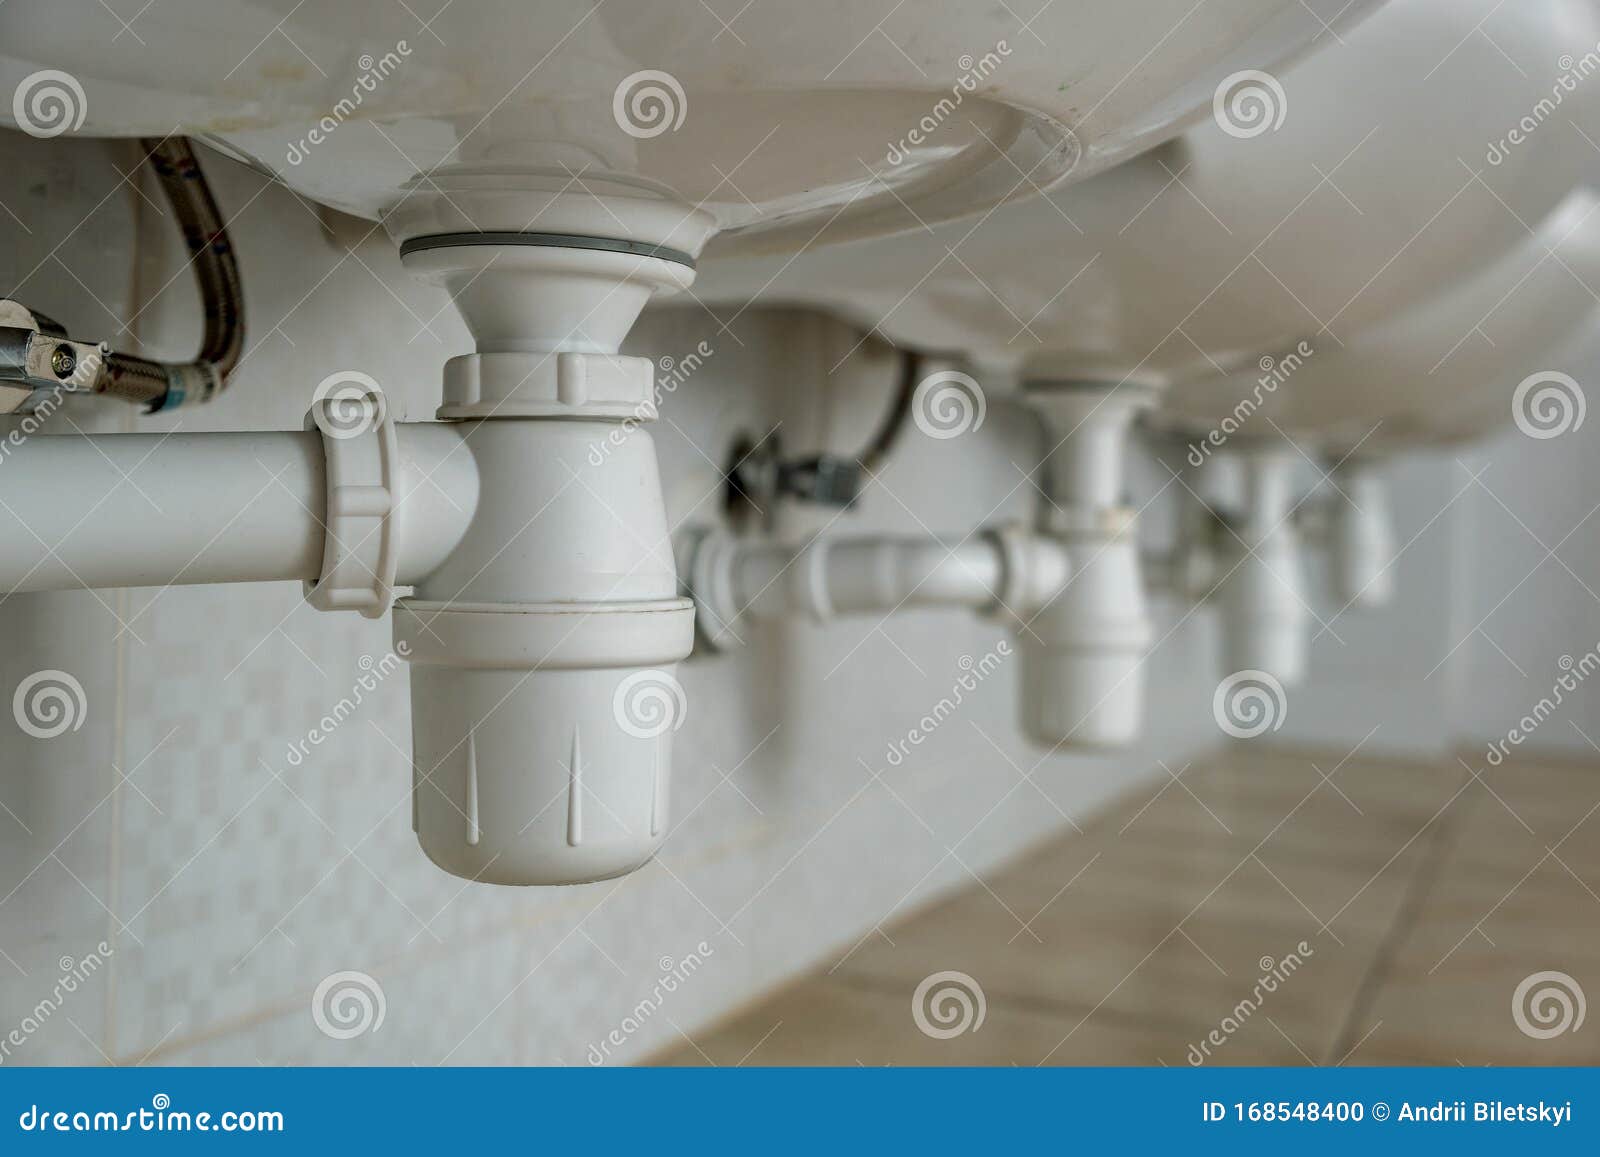 Close Up Of White Plastic Pipe Drain Under Washing Sink In Bathroom Stock Photo Image Of Fittings